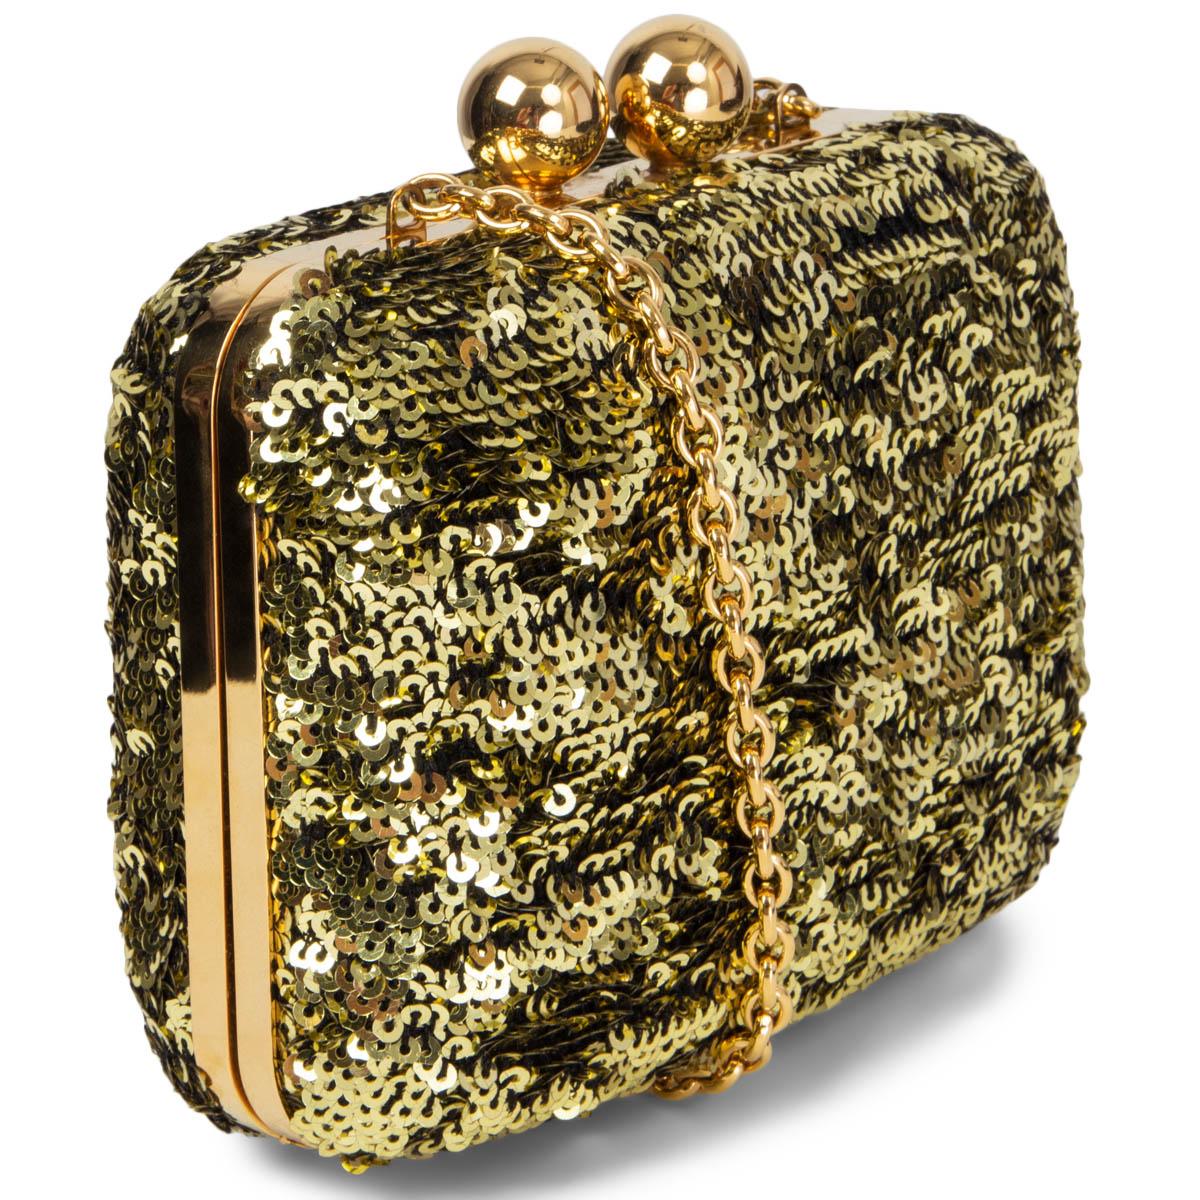 100% authentic Dolce & Gabbana Minaudière with Chain clutch in gold-tone sequins and hardware. Opens with a clasp closure and is lined in black velvet. Has been carried and is in excellent condition. Can be carried as a clutch or shoulder bag. Comes